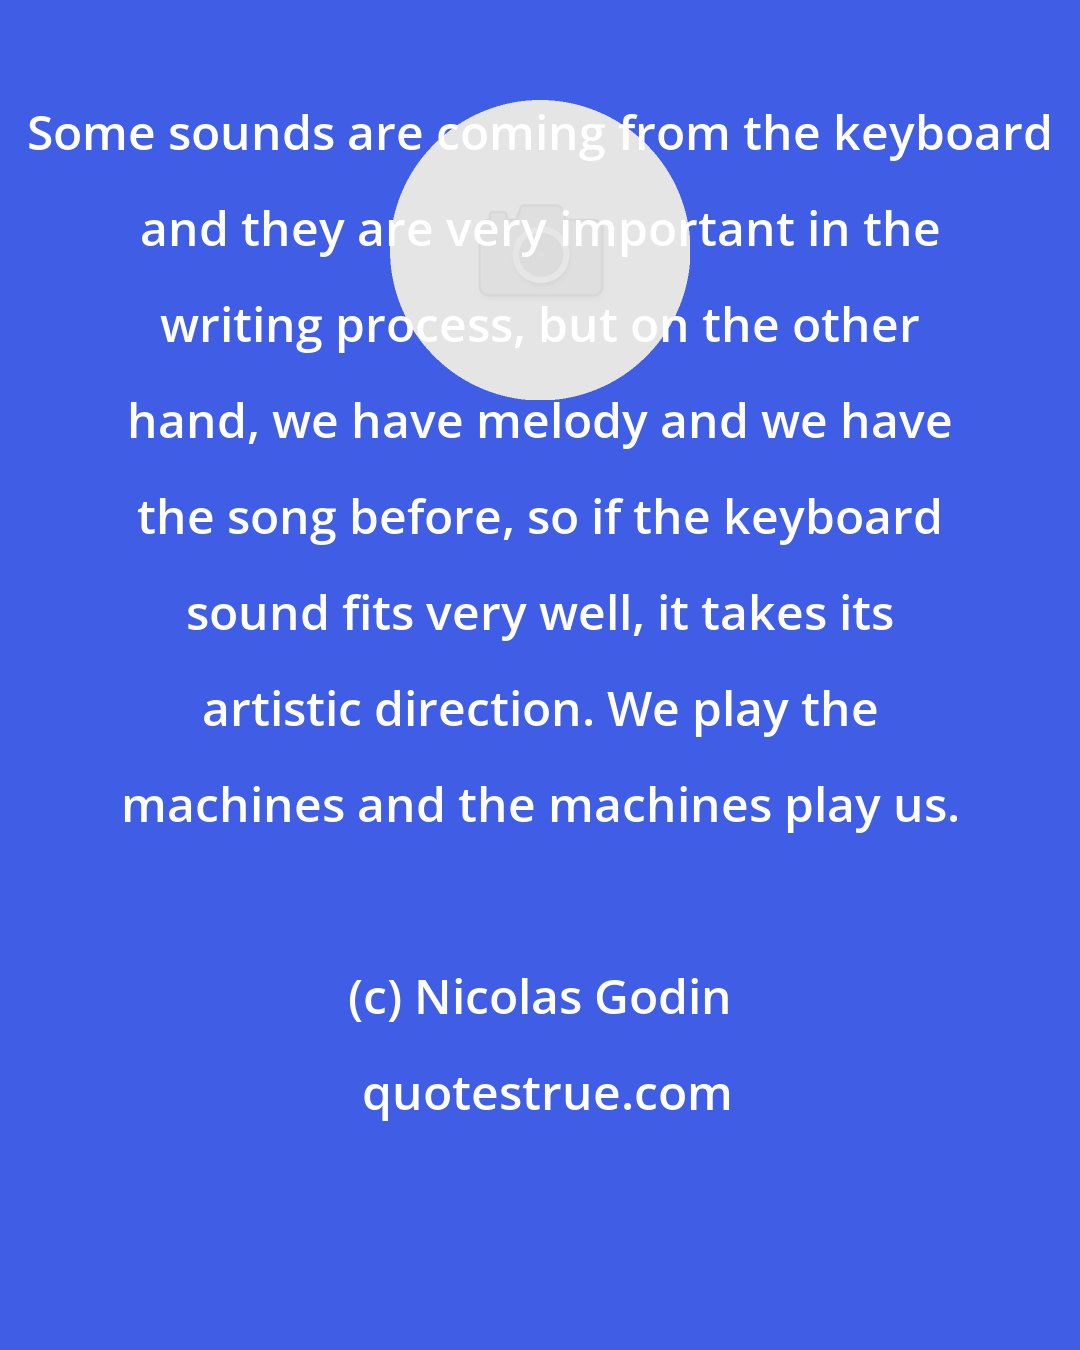 Nicolas Godin: Some sounds are coming from the keyboard and they are very important in the writing process, but on the other hand, we have melody and we have the song before, so if the keyboard sound fits very well, it takes its artistic direction. We play the machines and the machines play us.